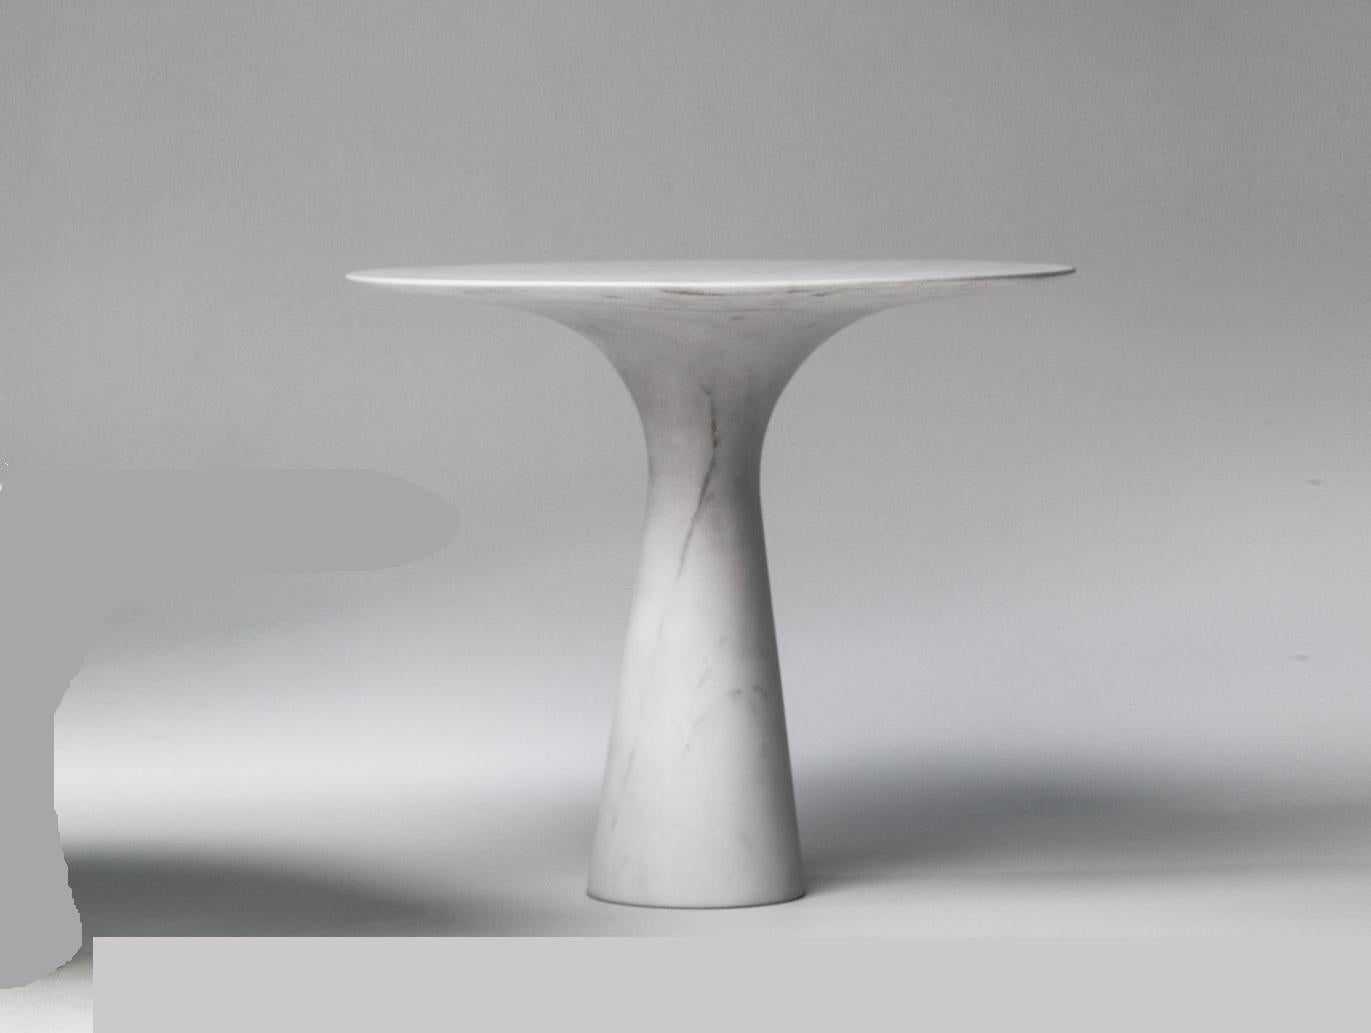 Refined Contemporary marble 03 Kyknos Marble cake stand
Signed by Leo Aerts.
Dimensions: Diameter 26 x height 22.5 cm 
Material: Kyknos marble
Technique: Polished, carved. 
Available in marble: Kyknos, Bianco Statuarietto, Grey Saint Laurent,